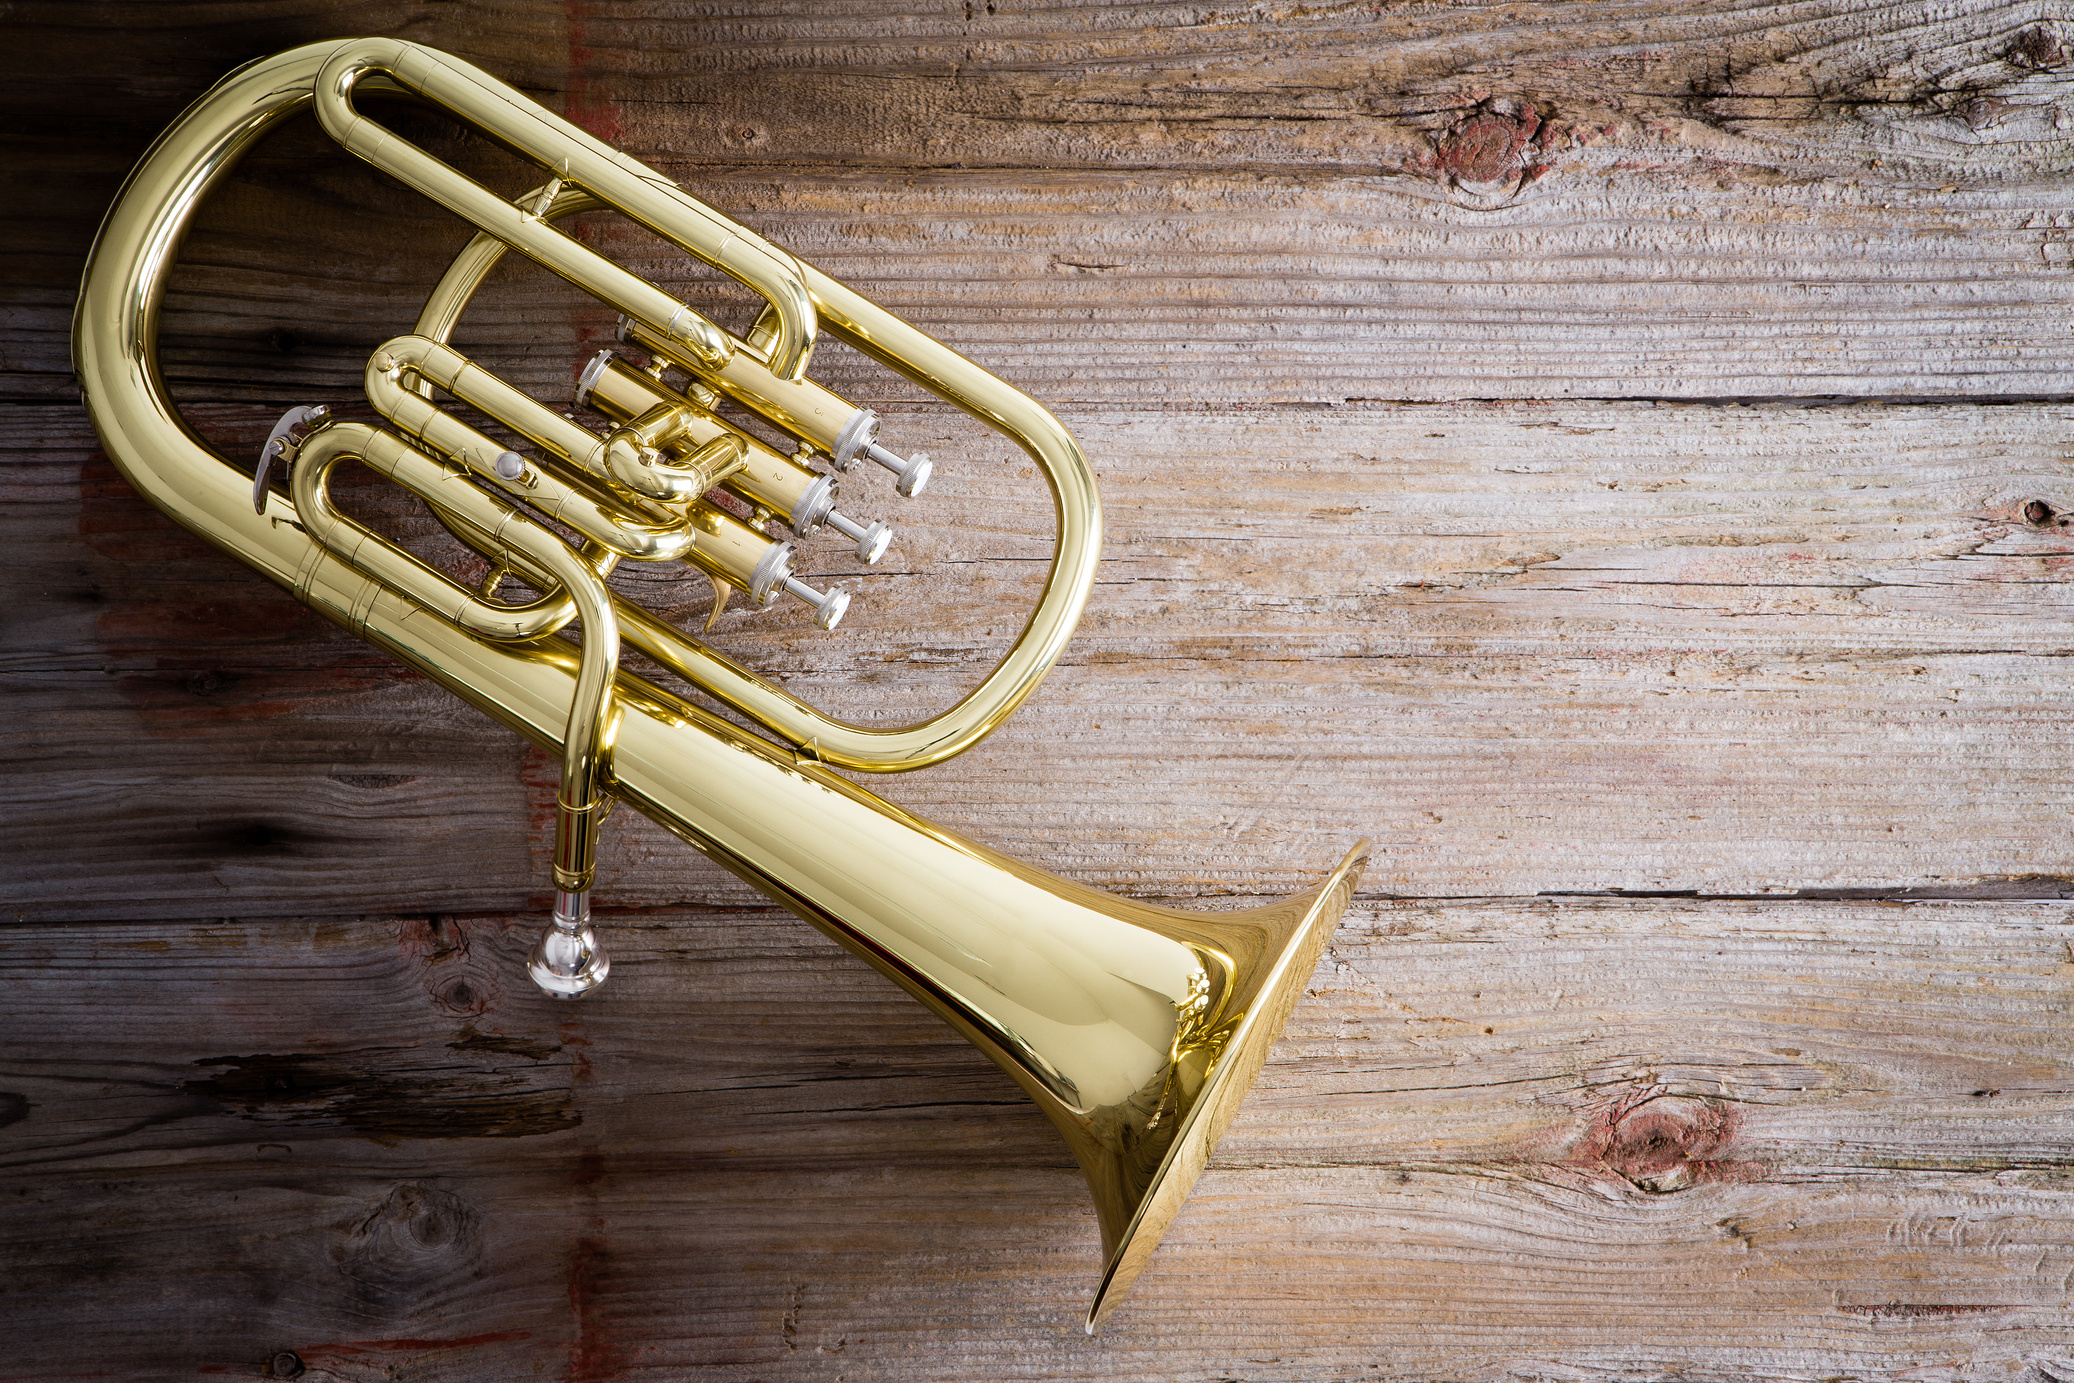 Baritone Horn on a Wooden Floor with Copy Space